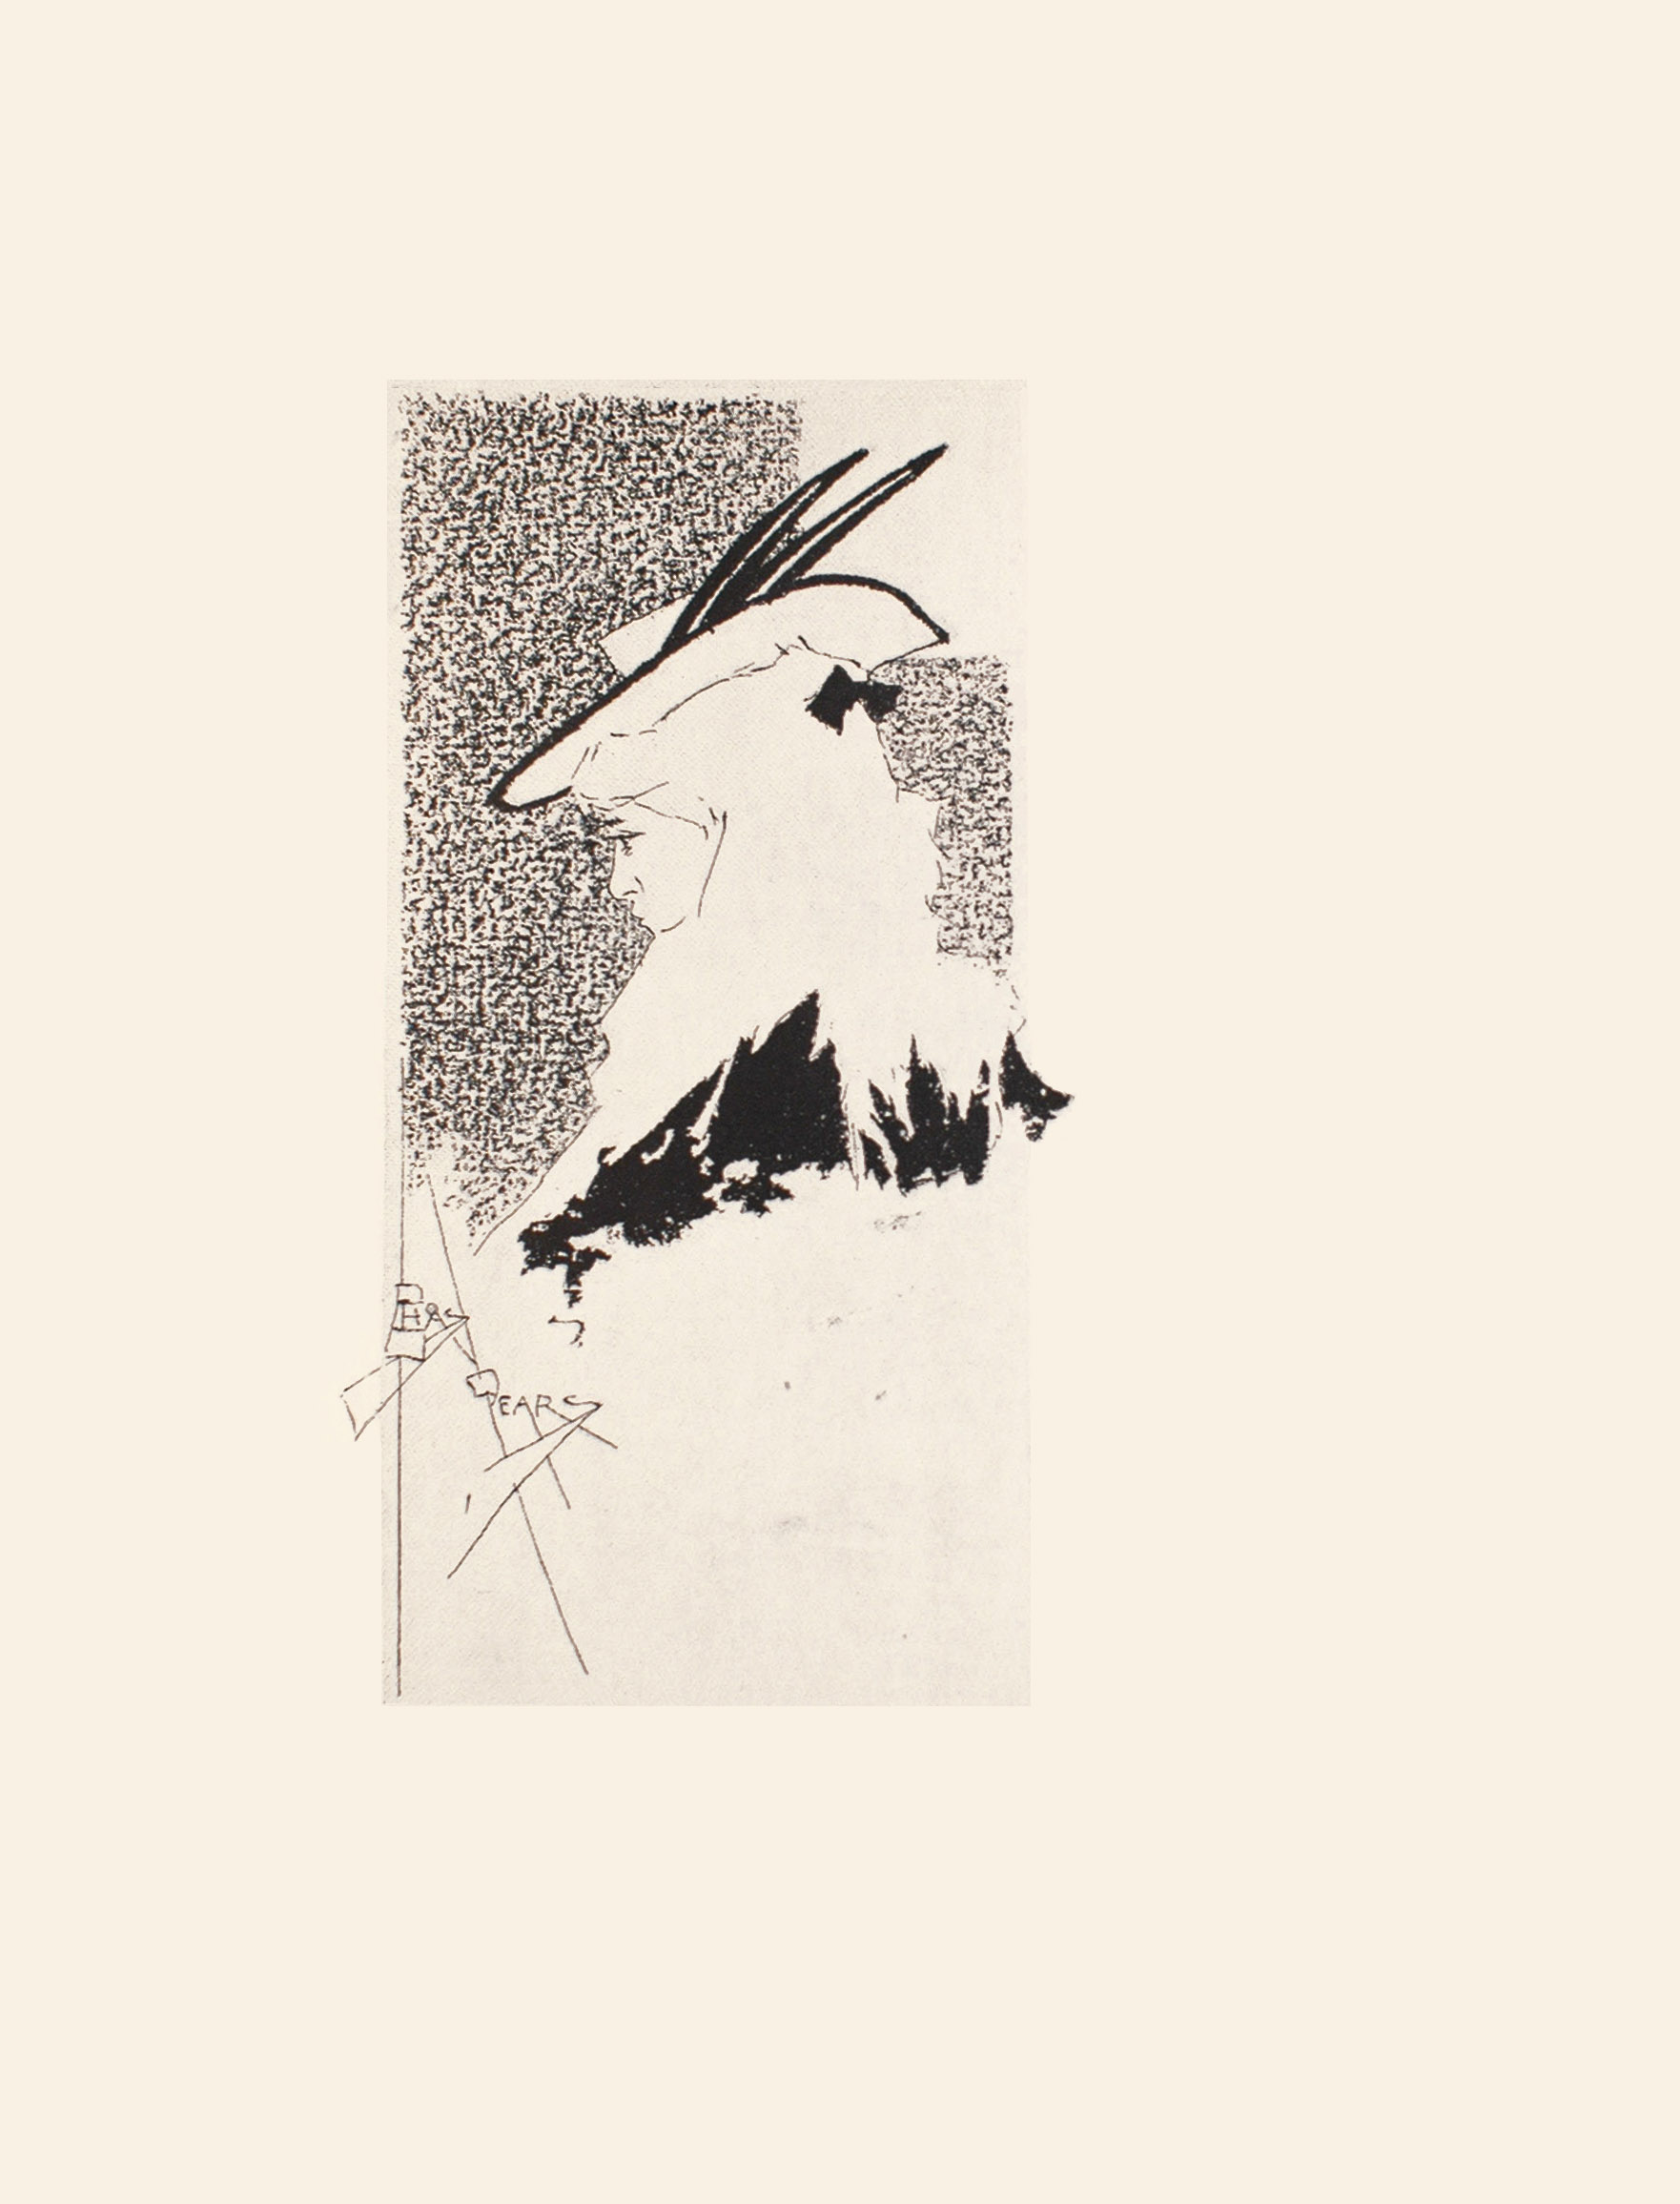 Image is of a woman shown in profile Her light coloured hair flows down her back and shoulders She is wearing a small black bow in her hair She has a light coloured hat with dark feathers on it There is a suggestion of the window to the upper right of the woman The artist s signature is in the lower left The image is vertically displayed